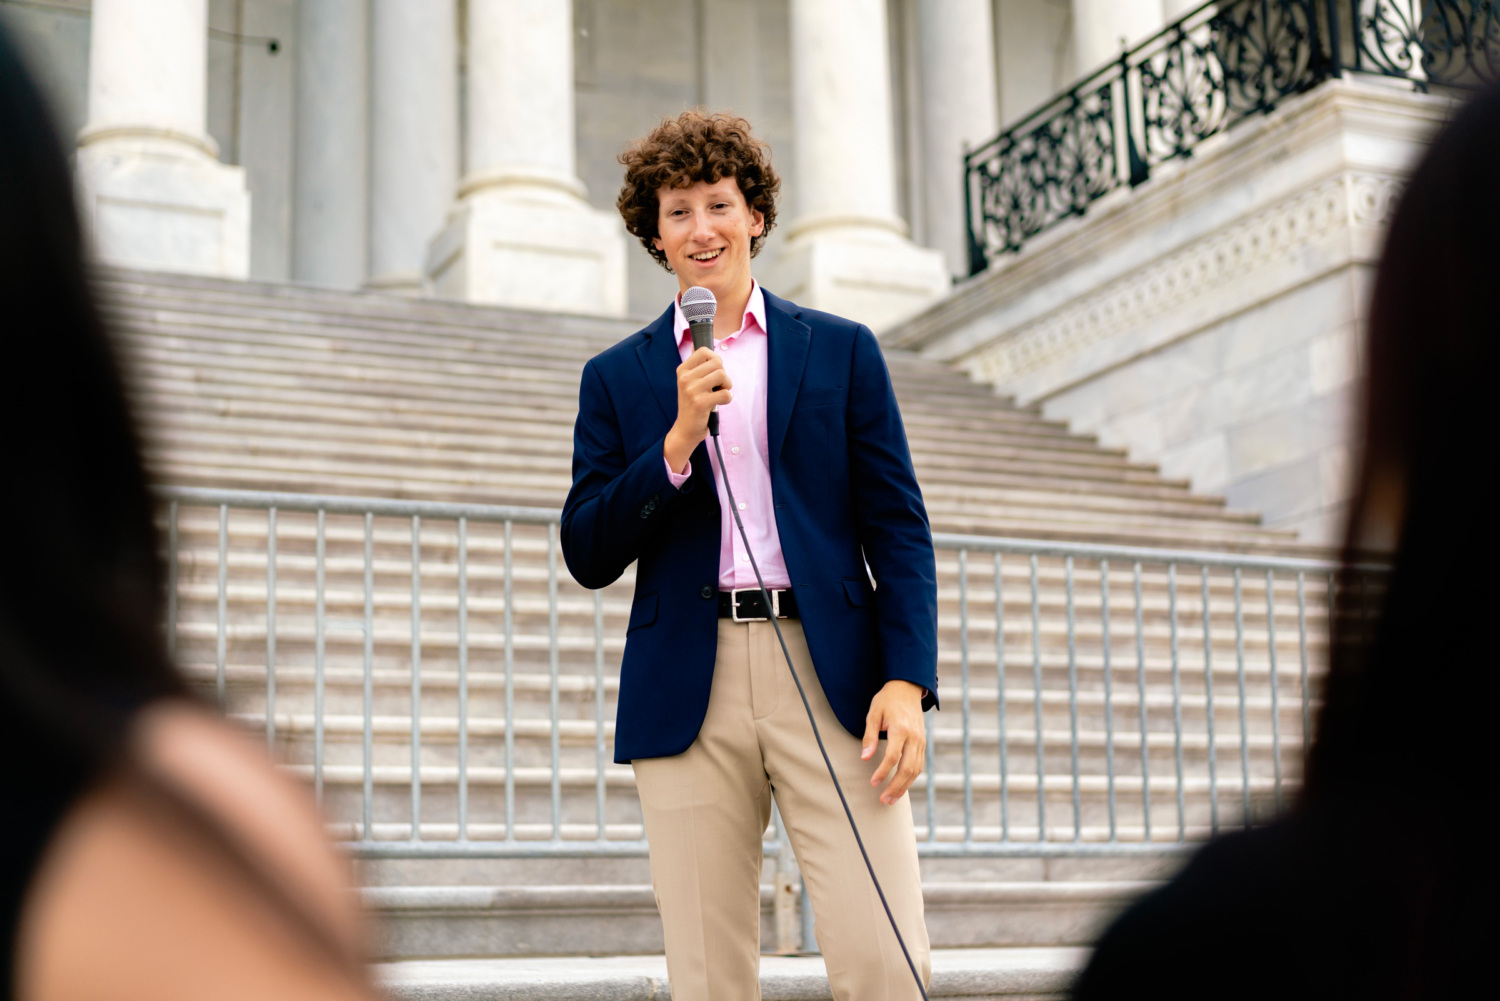 Max Bernsten speaking into a microphone to an audience outside the U.S. Capitol